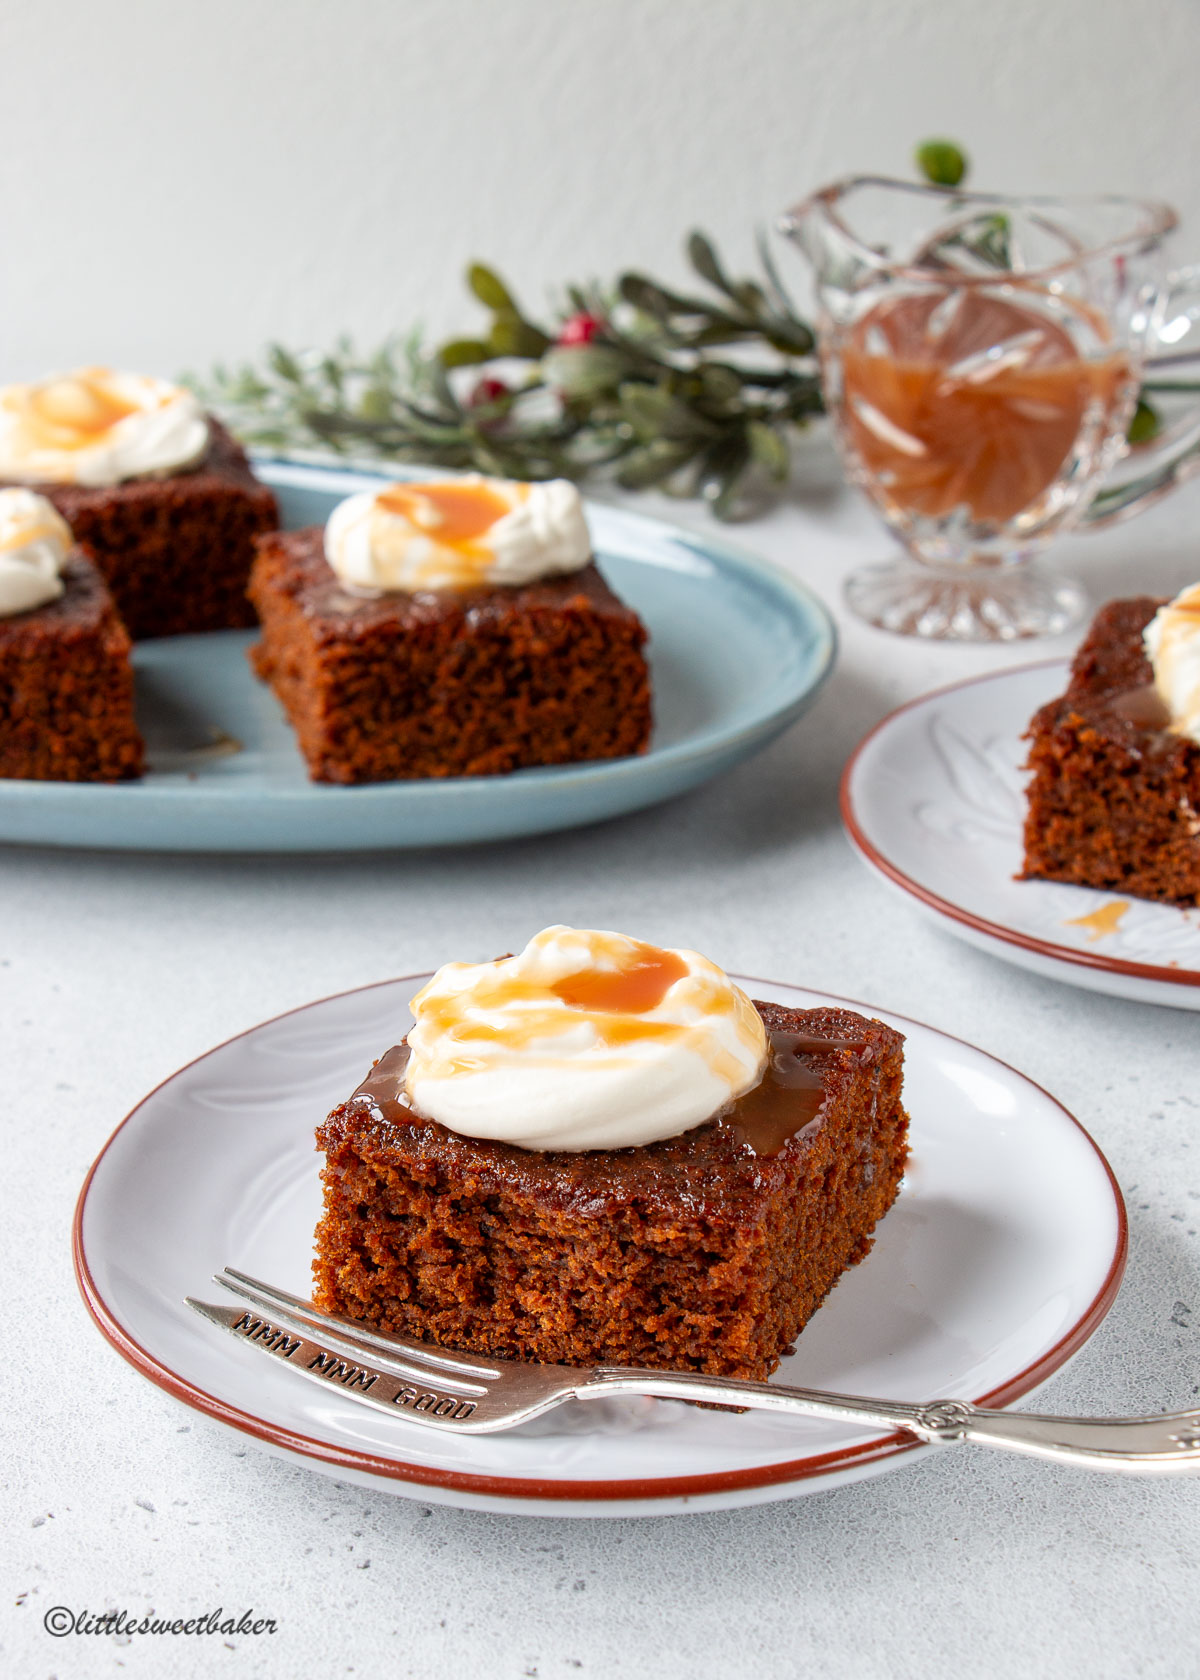 A slice of gingerbread cake topped with whipped cream and caramel on a grey plate.